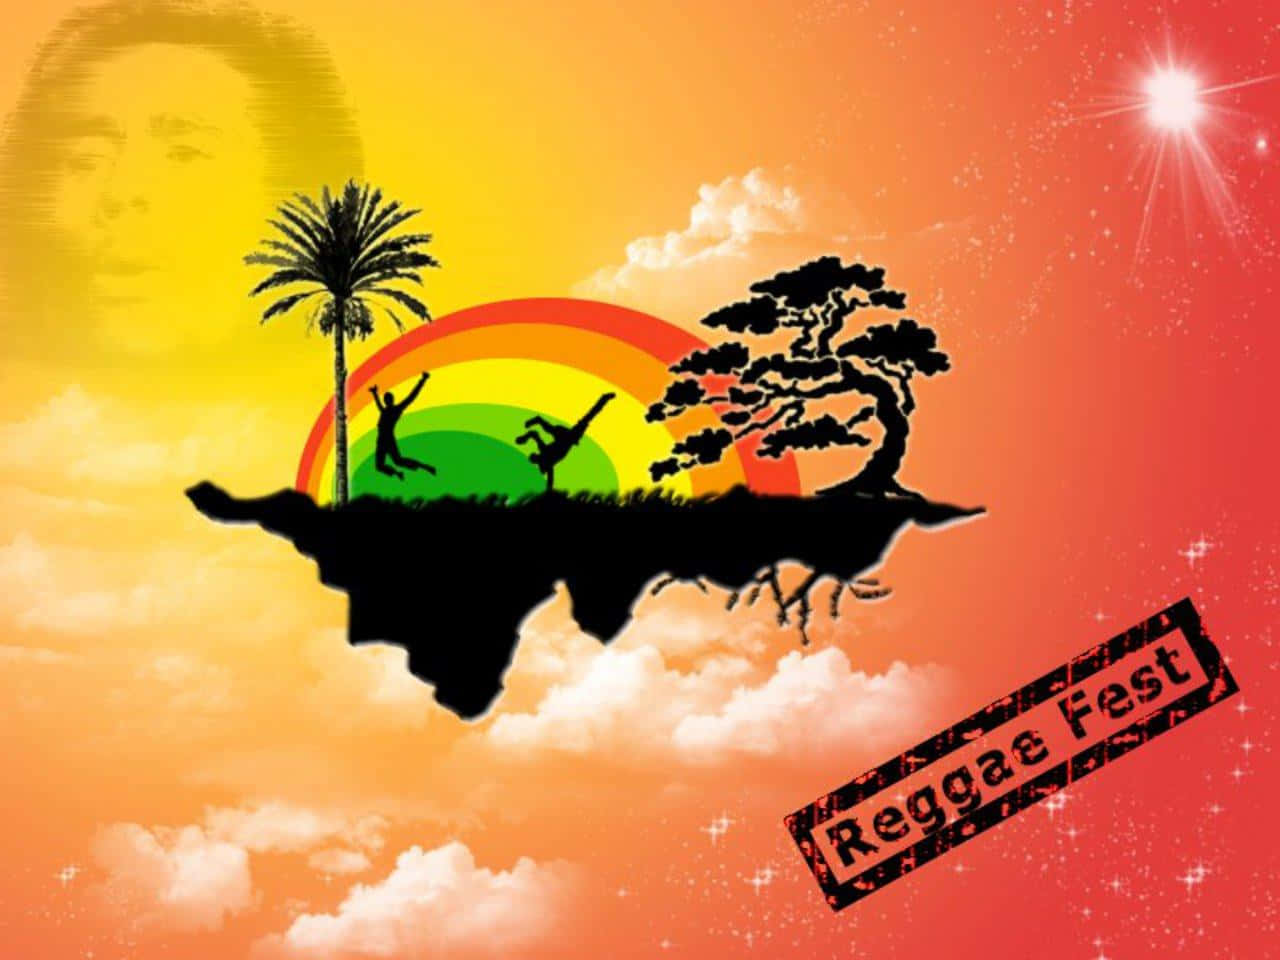 Reggae Fest - A Poster With A Palm Tree And A Rainbow